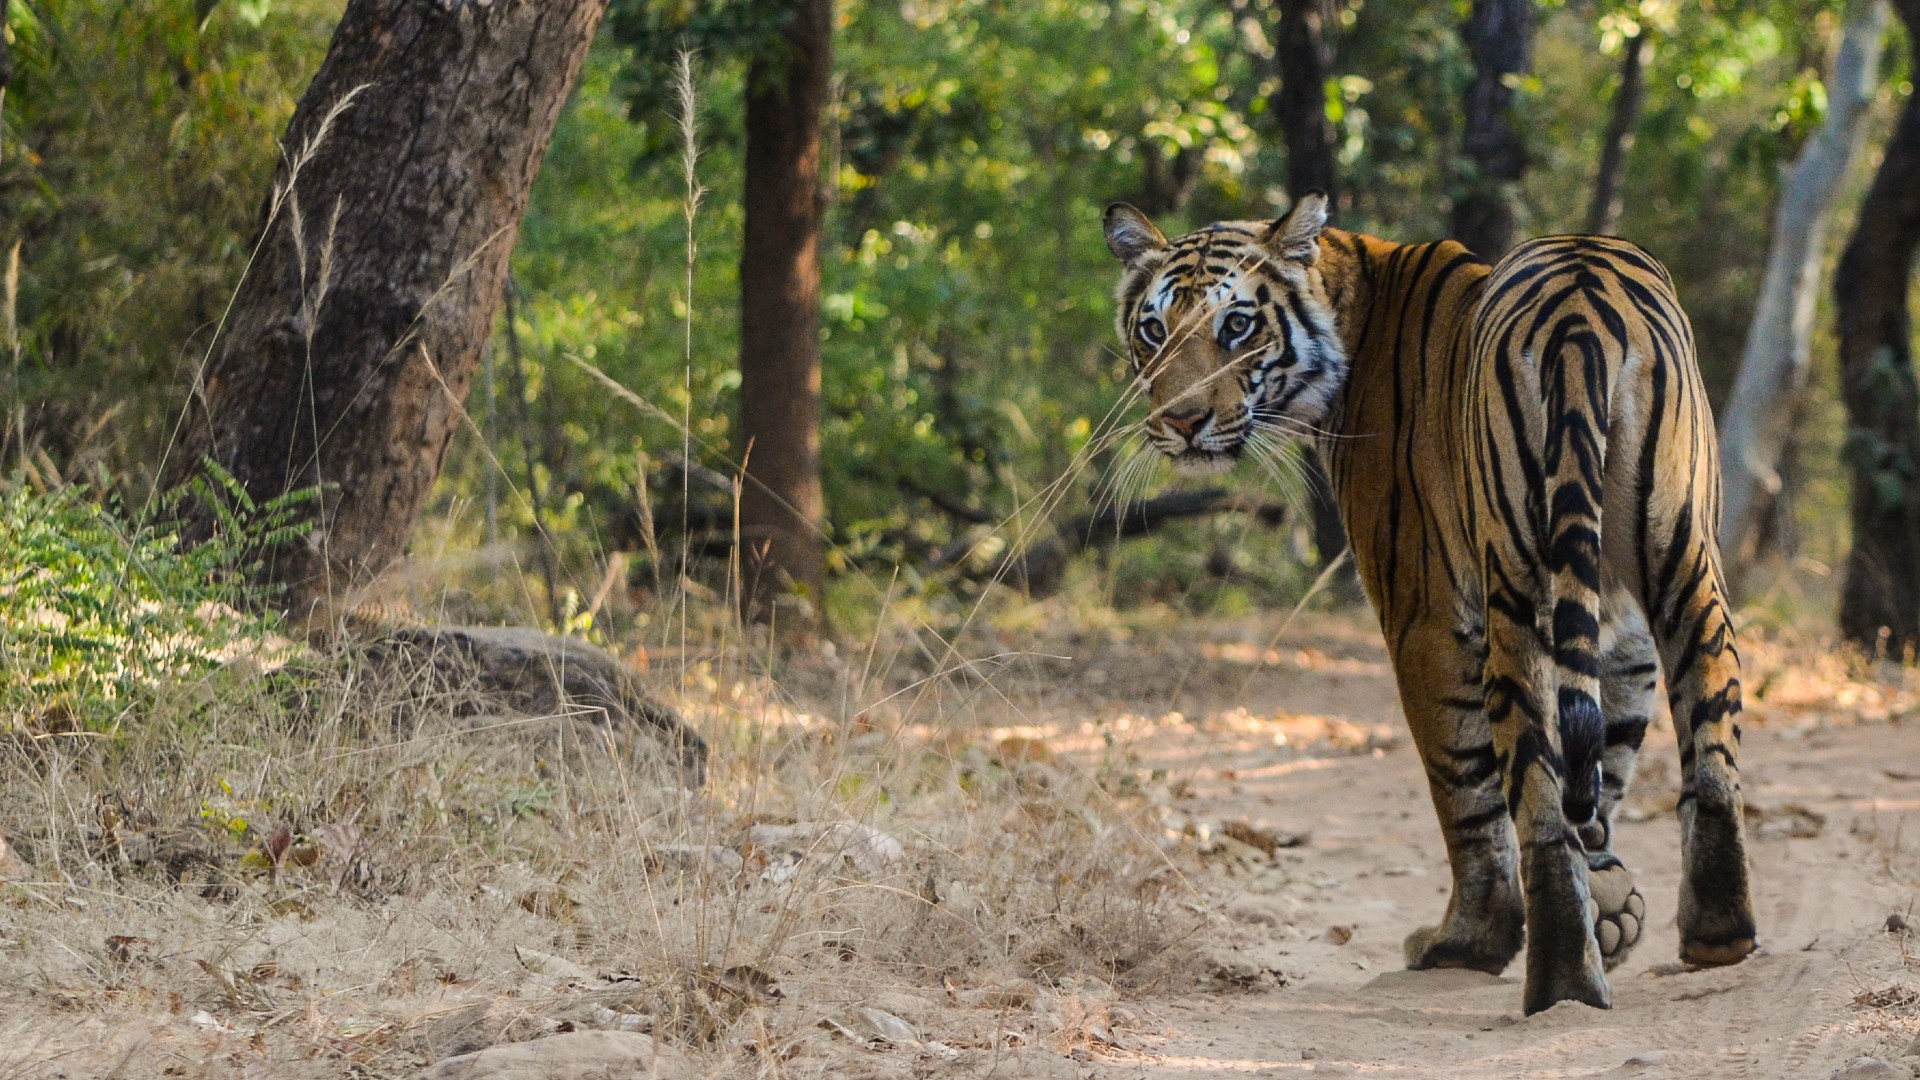 A wild tiger walking on a forest pathway